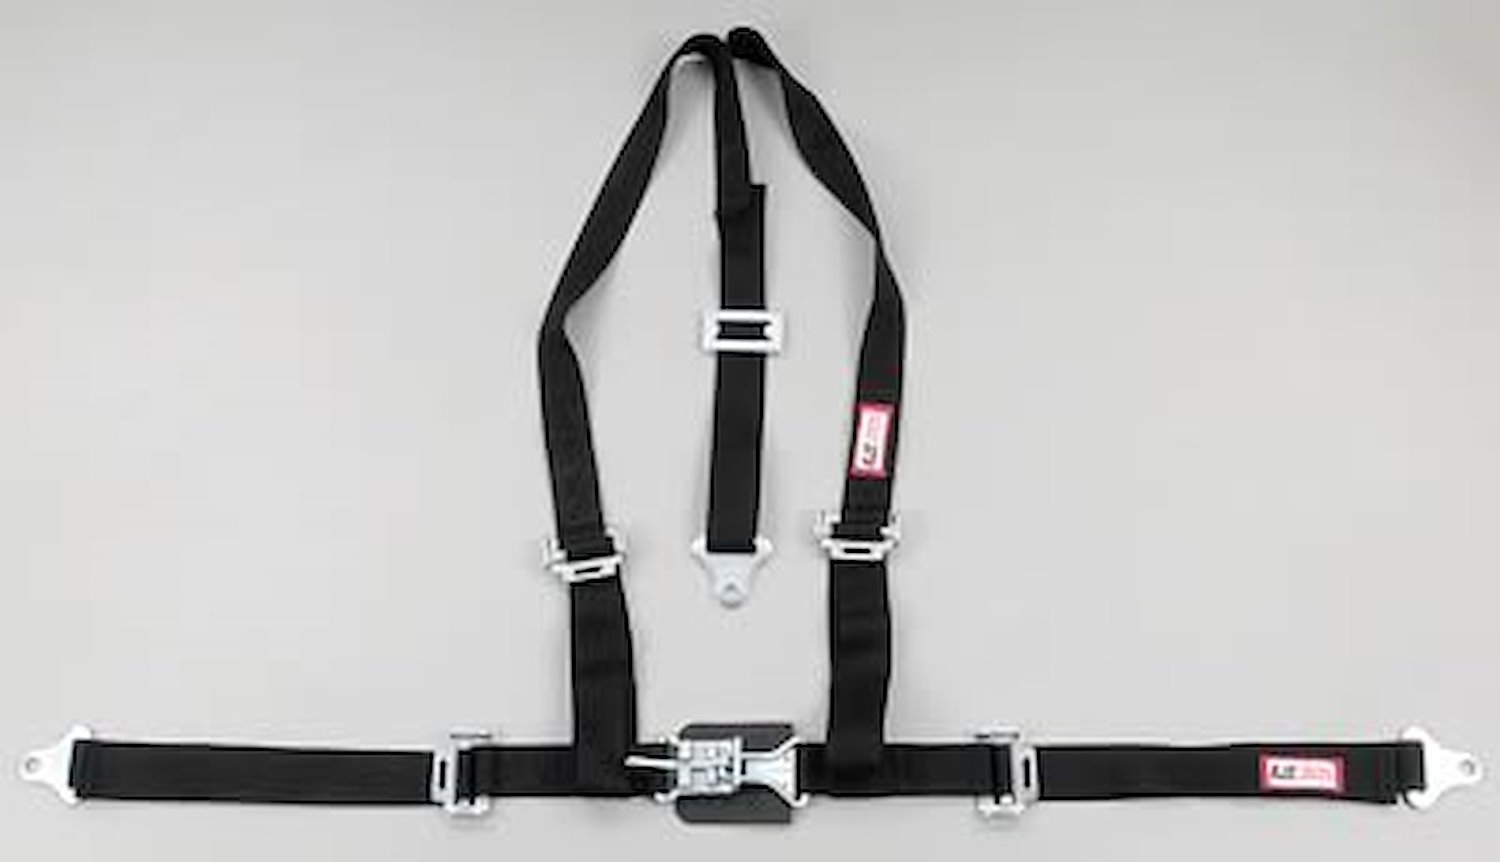 NON-SFI L&L HARNESS 2 PULL DOWN Lap Belt SEWN IN 2 S.H. INDIVIDUAL FLOOR Mount w/STERNUM STRAP ALL WRAP ENDS OD GREEN